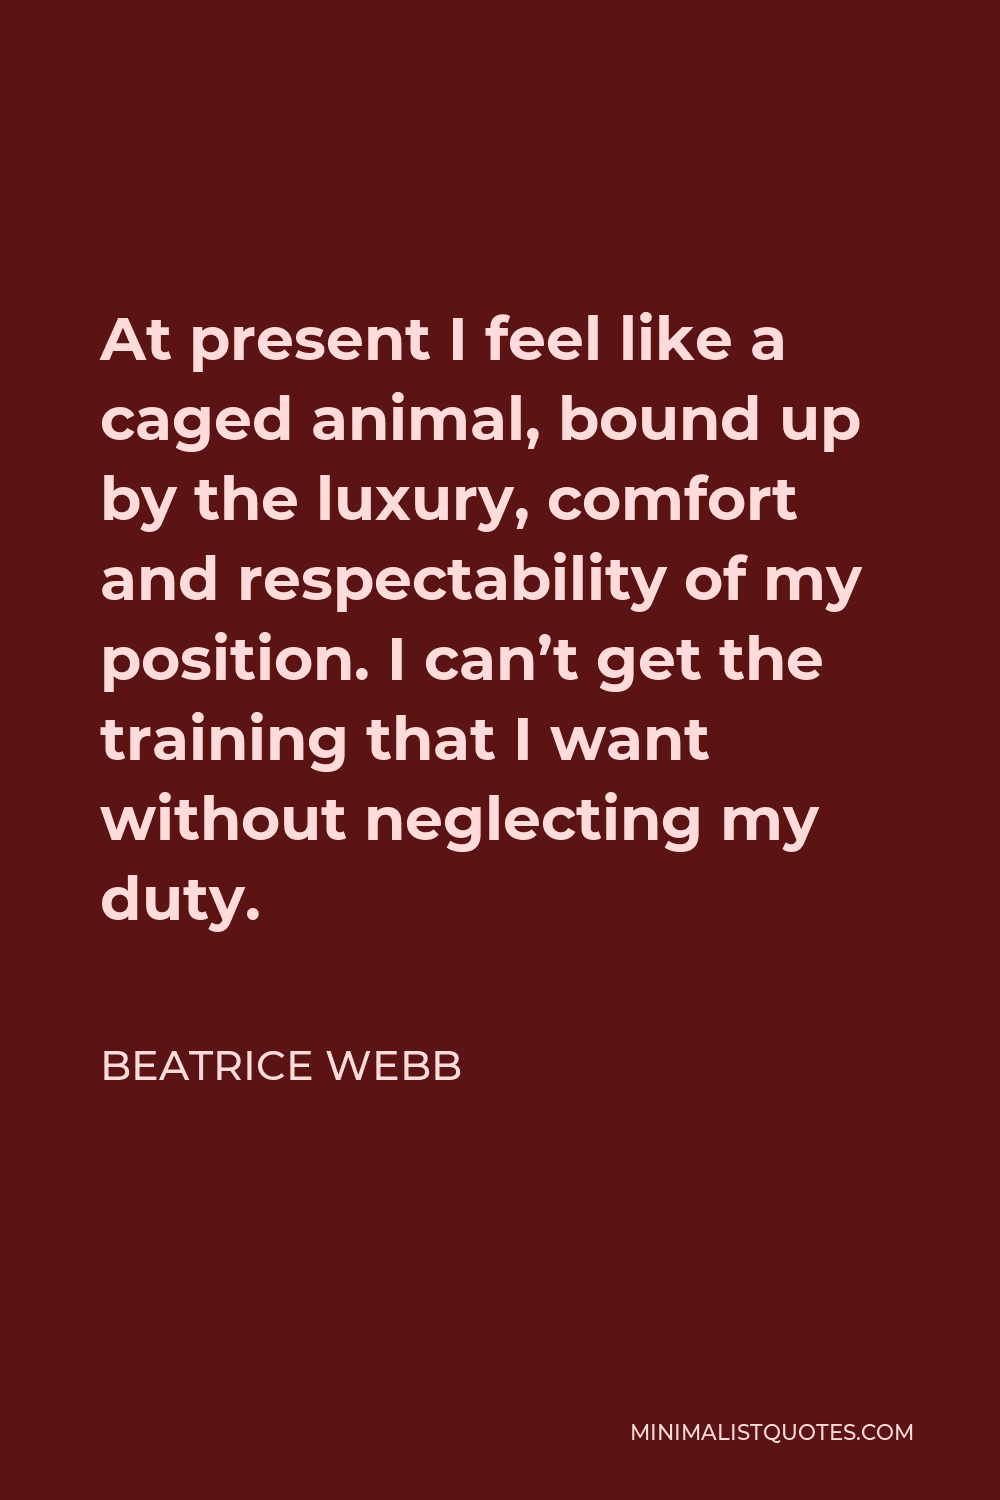 Beatrice Webb Quote - At present I feel like a caged animal, bound up by the luxury, comfort and respectability of my position. I can’t get the training that I want without neglecting my duty.